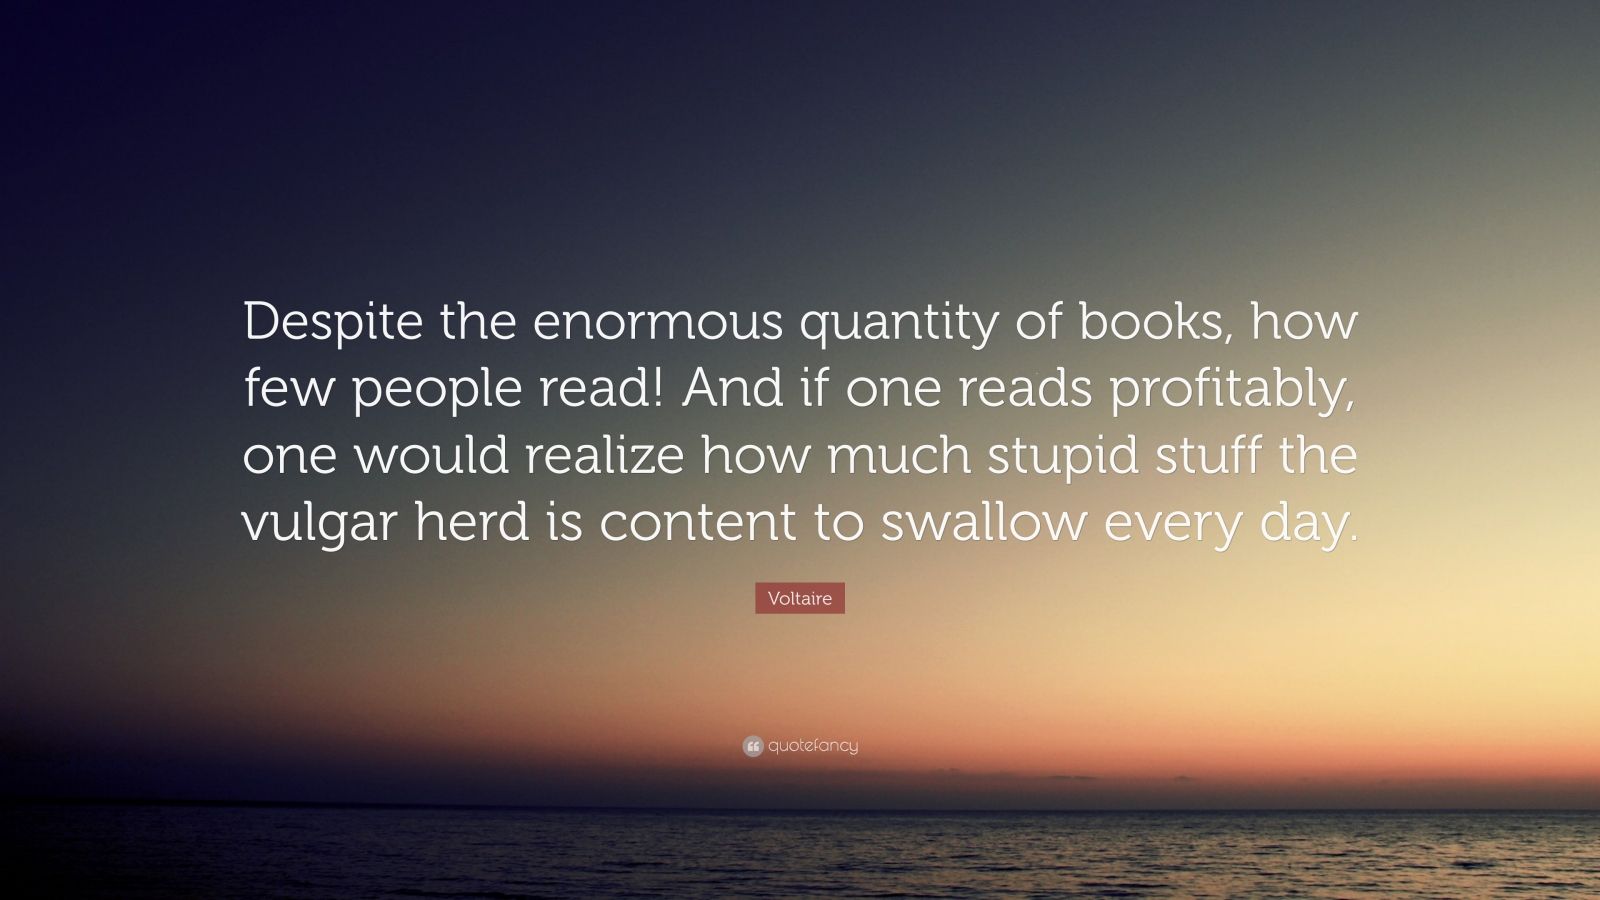 Voltaire Quote: “Despite the enormous quantity of books, how few people ...